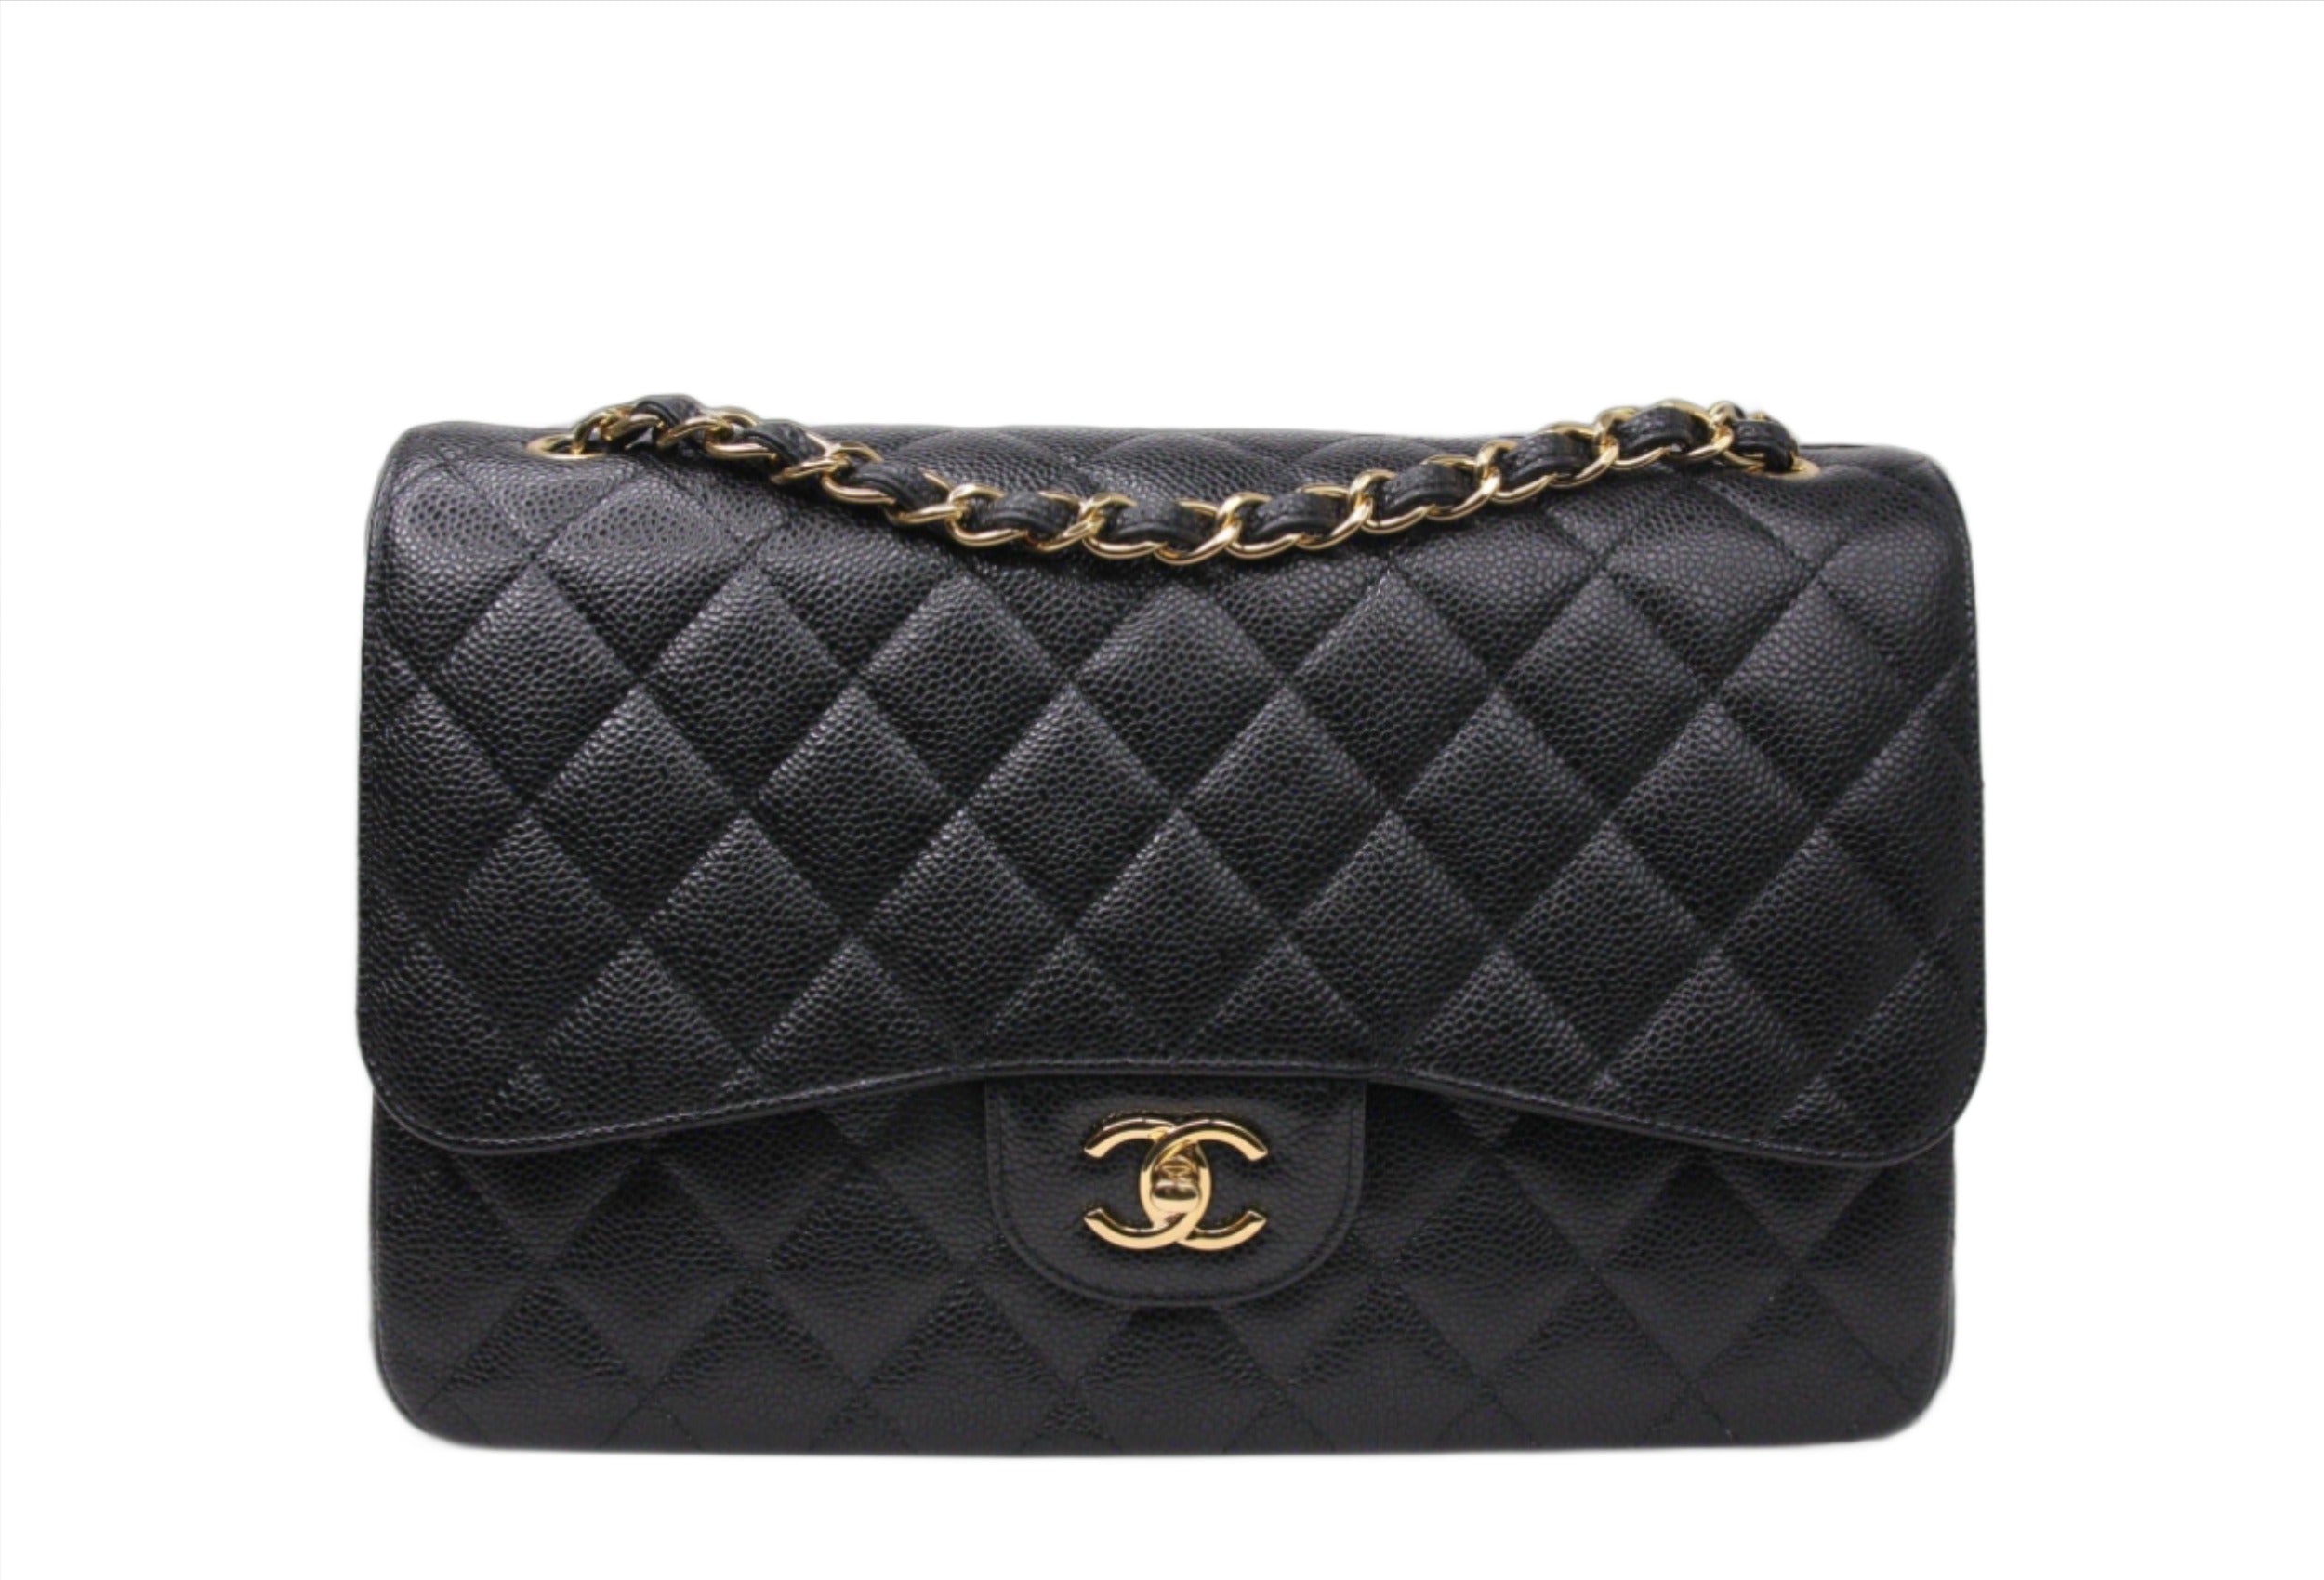 Front of Chanel Jumbo Flap finished in black caviar